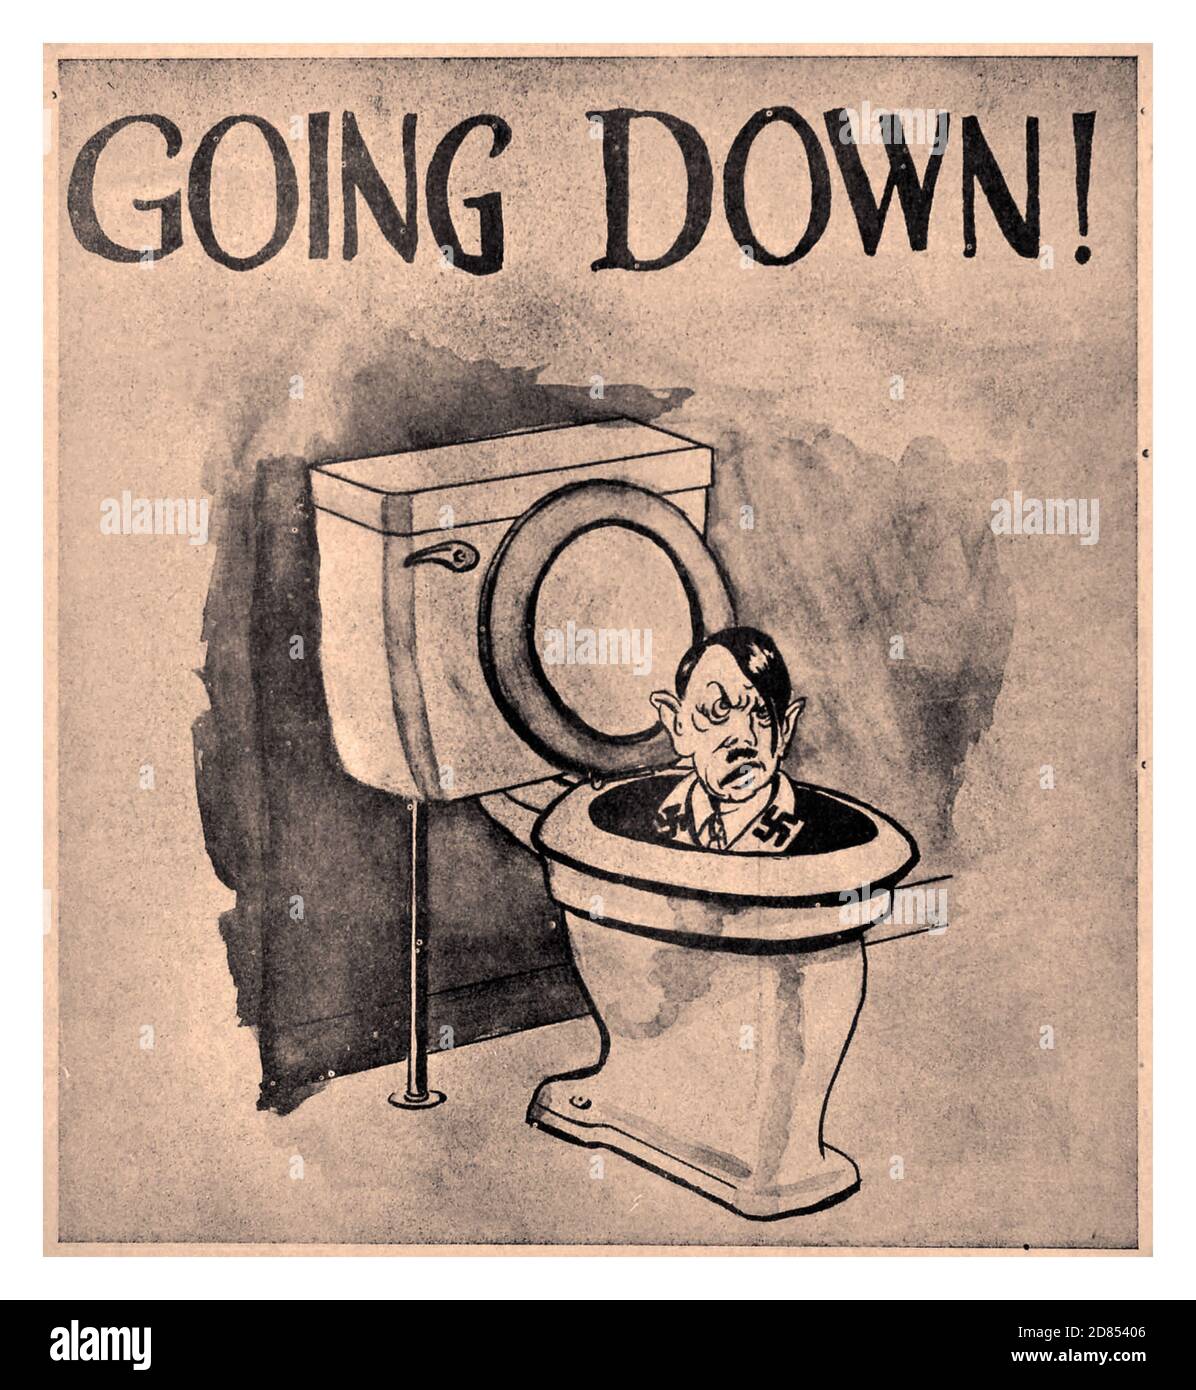 WW2 War HITLER cartoon poster ‘Going Down’ with Adolf Hitler going down a lavatory wearing a swastika symbol.  vintage propaganda poster titled 'Going Down!', featuring a black and white drawing of Adolf Hitler's caricature cartoon sinking down a toilet seat. The poster was issued by Hobo news, an early 20th-century newspaper for homeless migrant workers. It was published in St. Louis, Missouri, and Cincinnati by the International Brotherhood Welfare Association (IBWA) and its founder James Eads How.  : USA, designer: Hobo News,  year of printing: 1940s Stock Photo